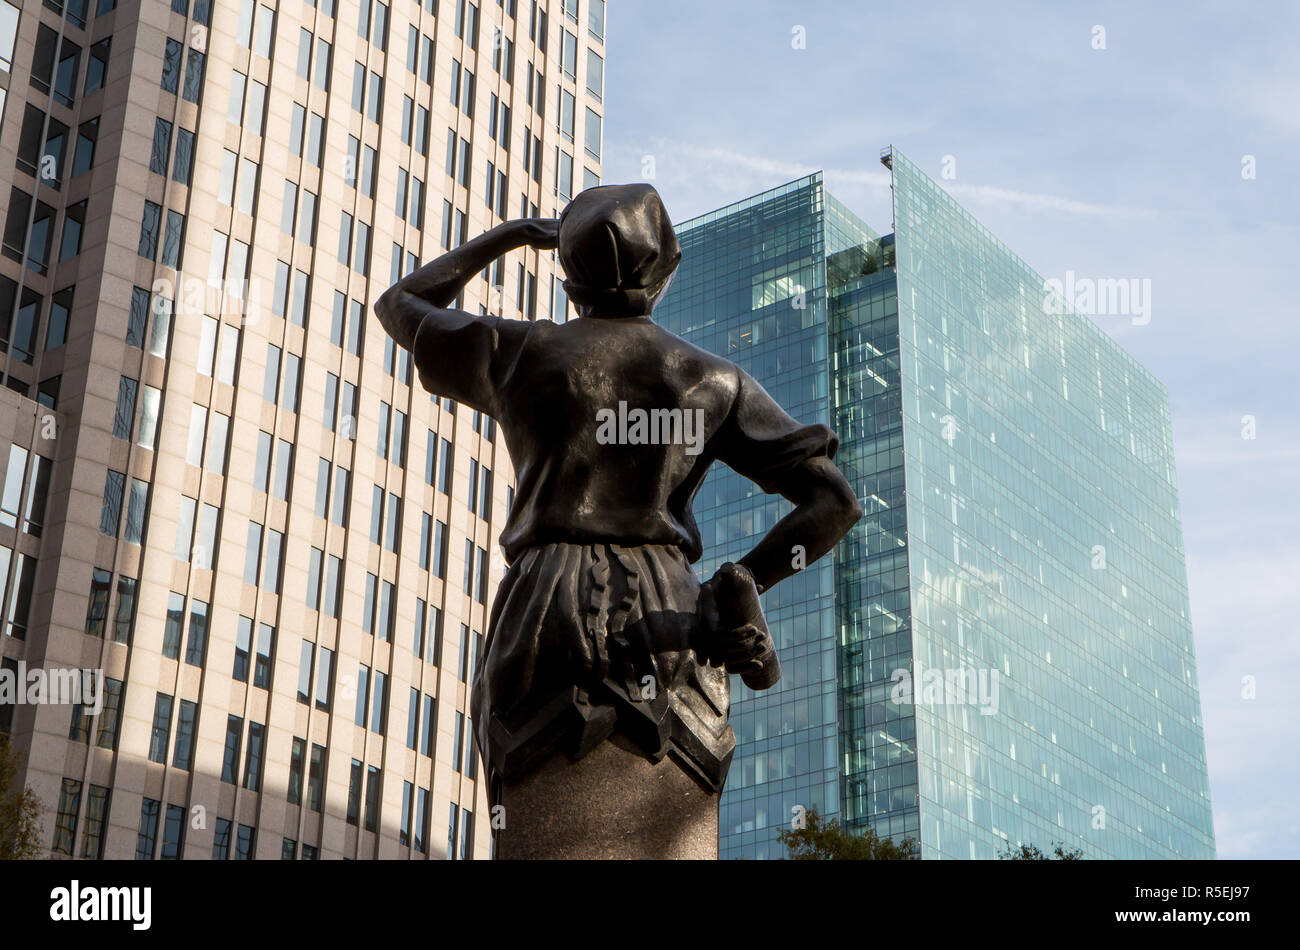 CHARLOTTE, NC - November 25, 2016:  Closeup of a sculpture on The Square in Uptown Charlotte with bank buildings in the background. Stock Photo